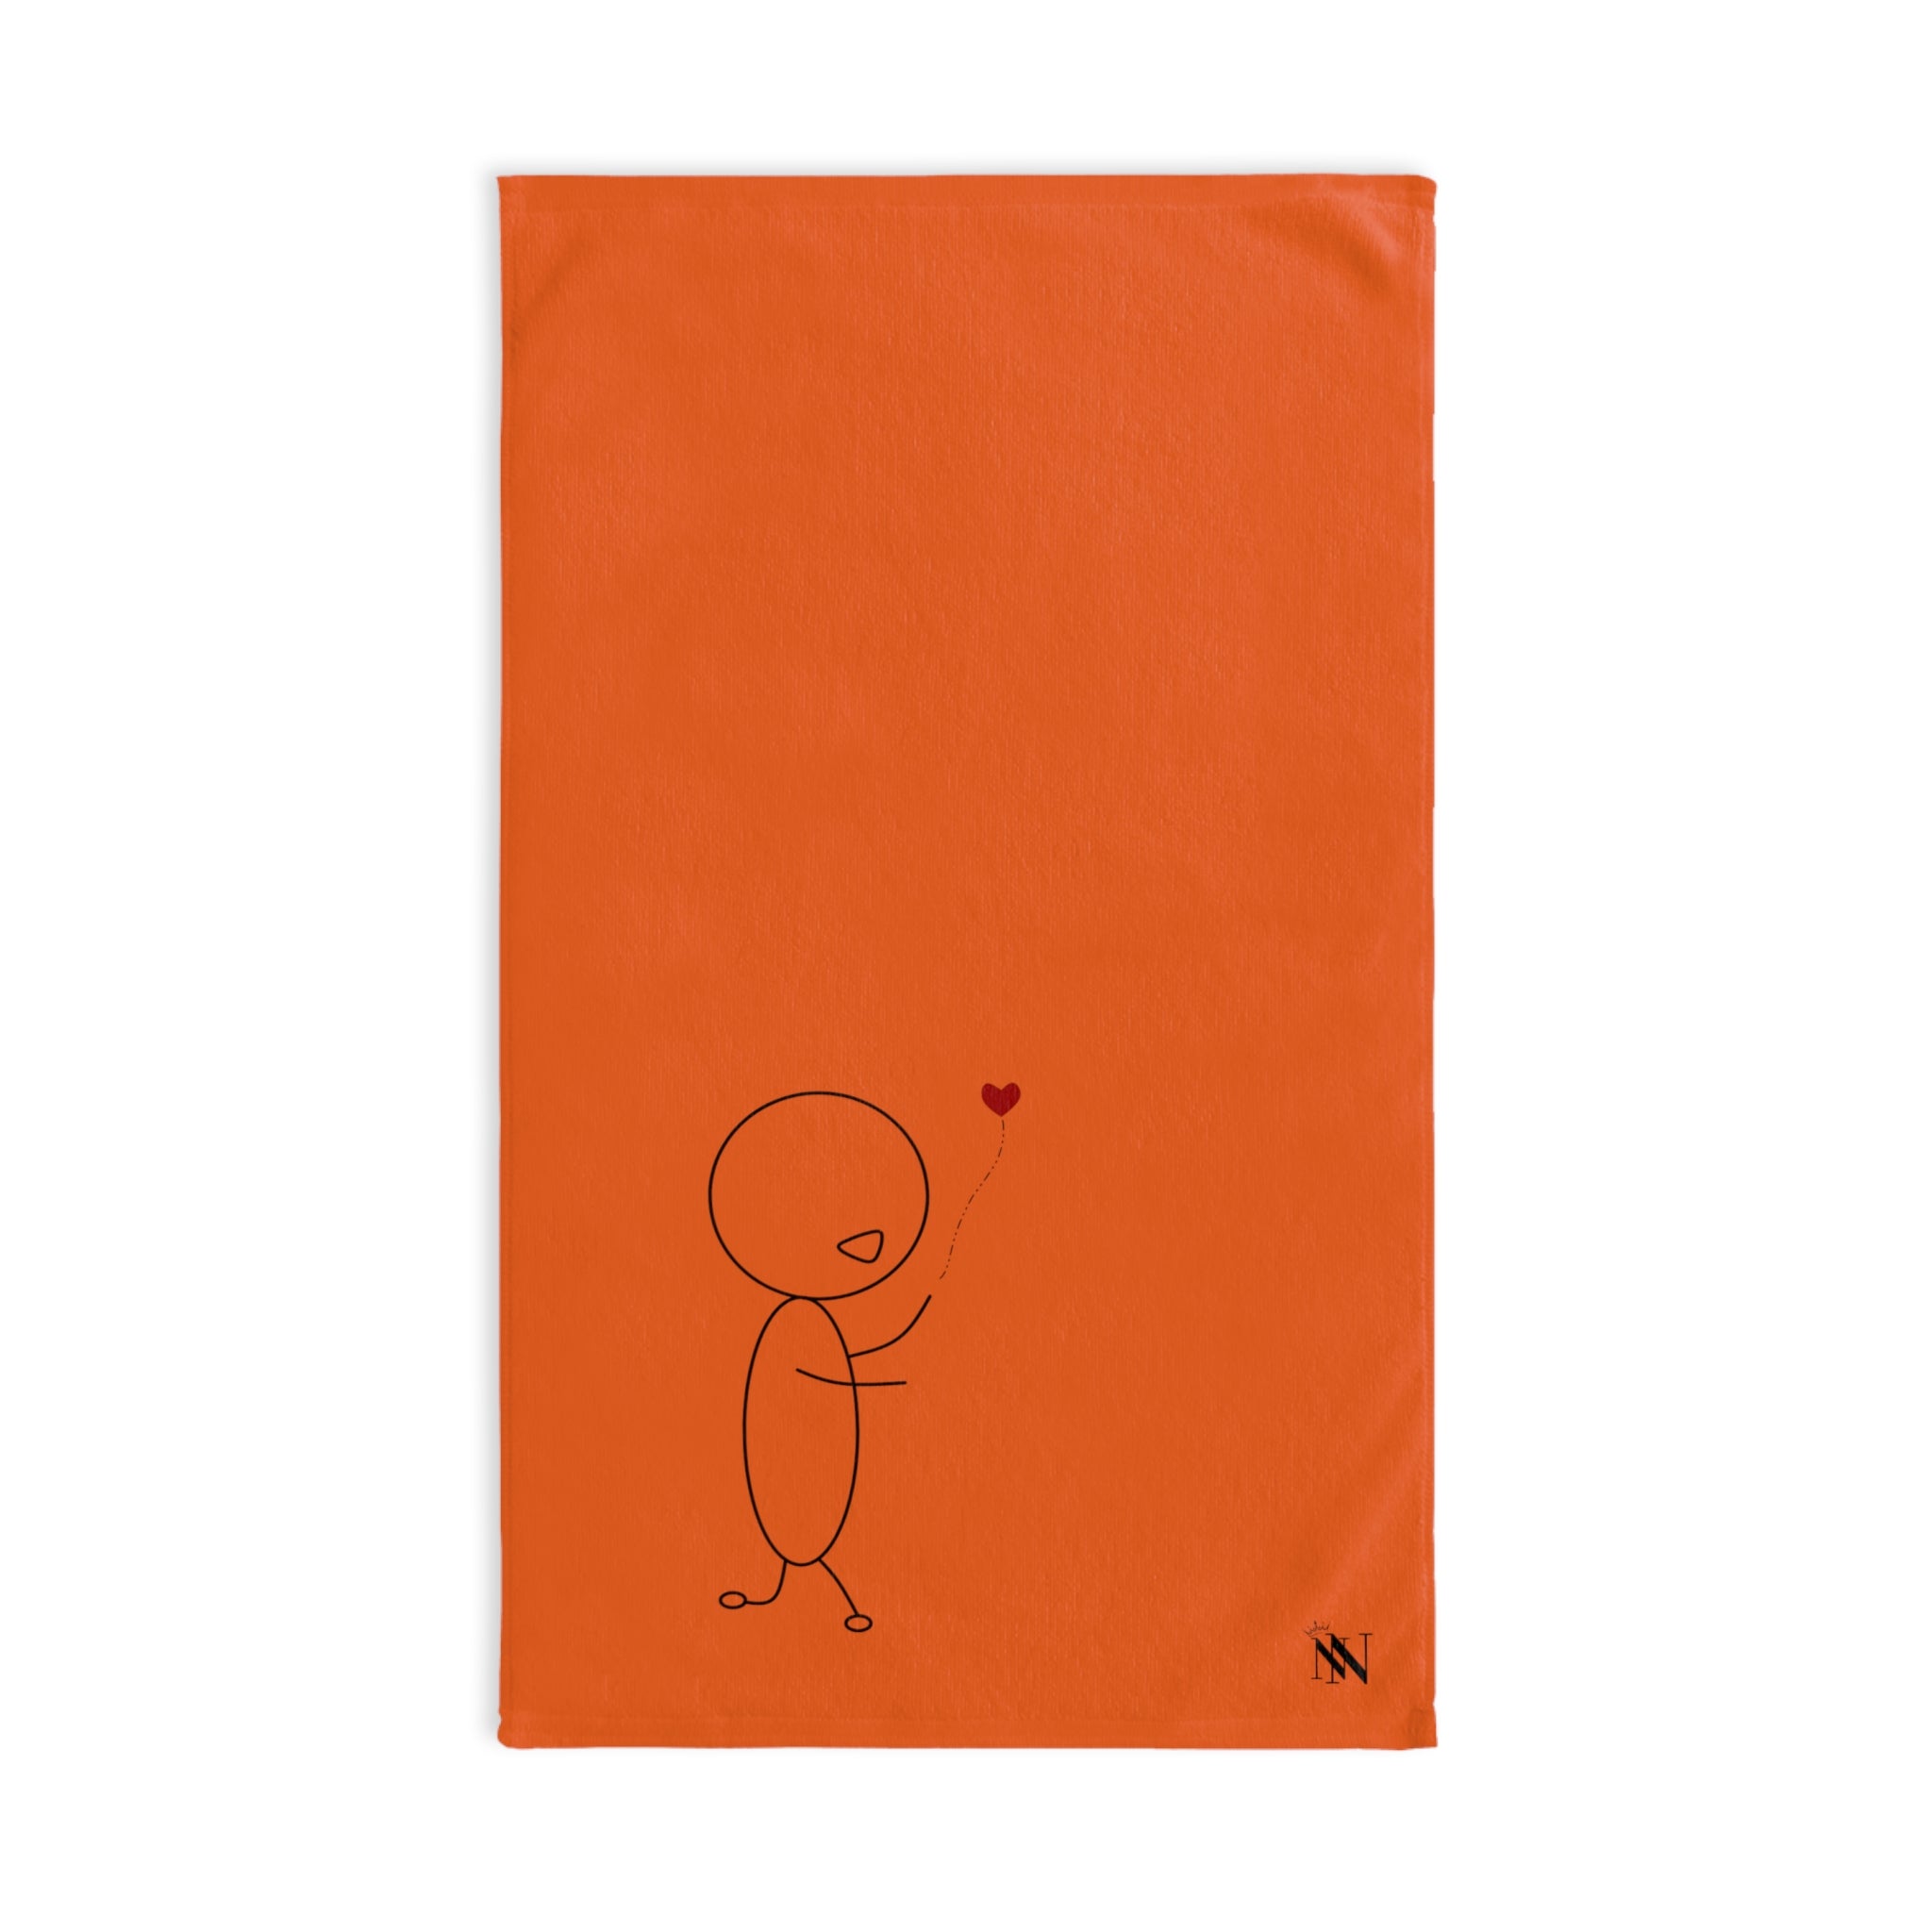 Stick Man Balloon Orange | Funny Gifts for Men - Gifts for Him - Birthday Gifts for Men, Him, Husband, Boyfriend, New Couple Gifts, Fathers & Valentines Day Gifts, Hand Towels NECTAR NAPKINS